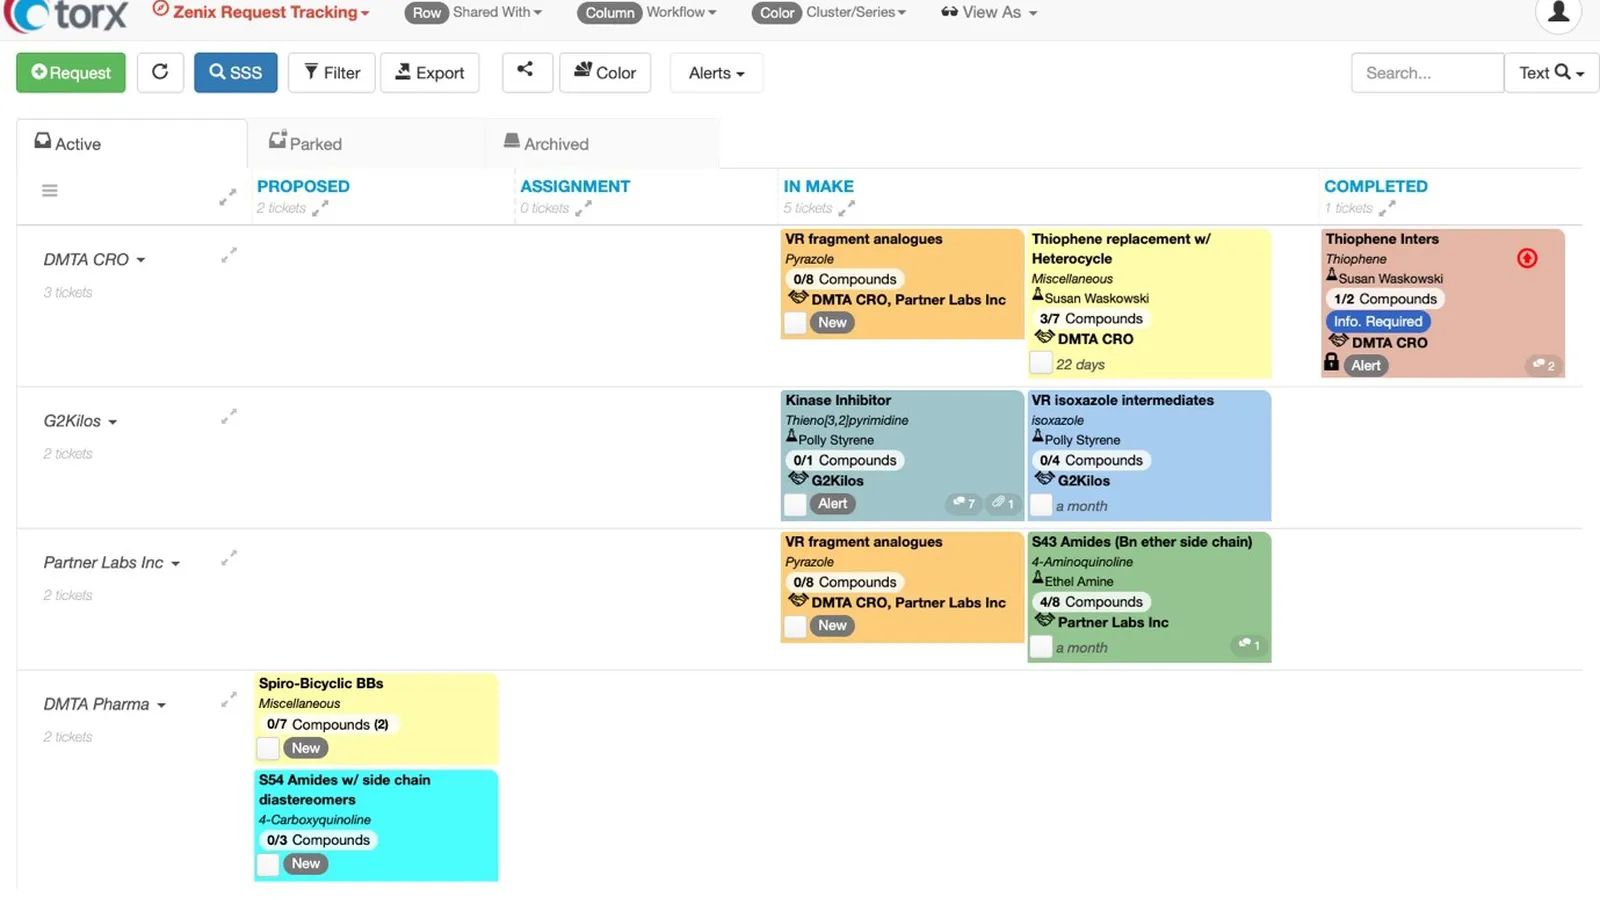 View and track the progress of all synthesis projects in the request tracking board